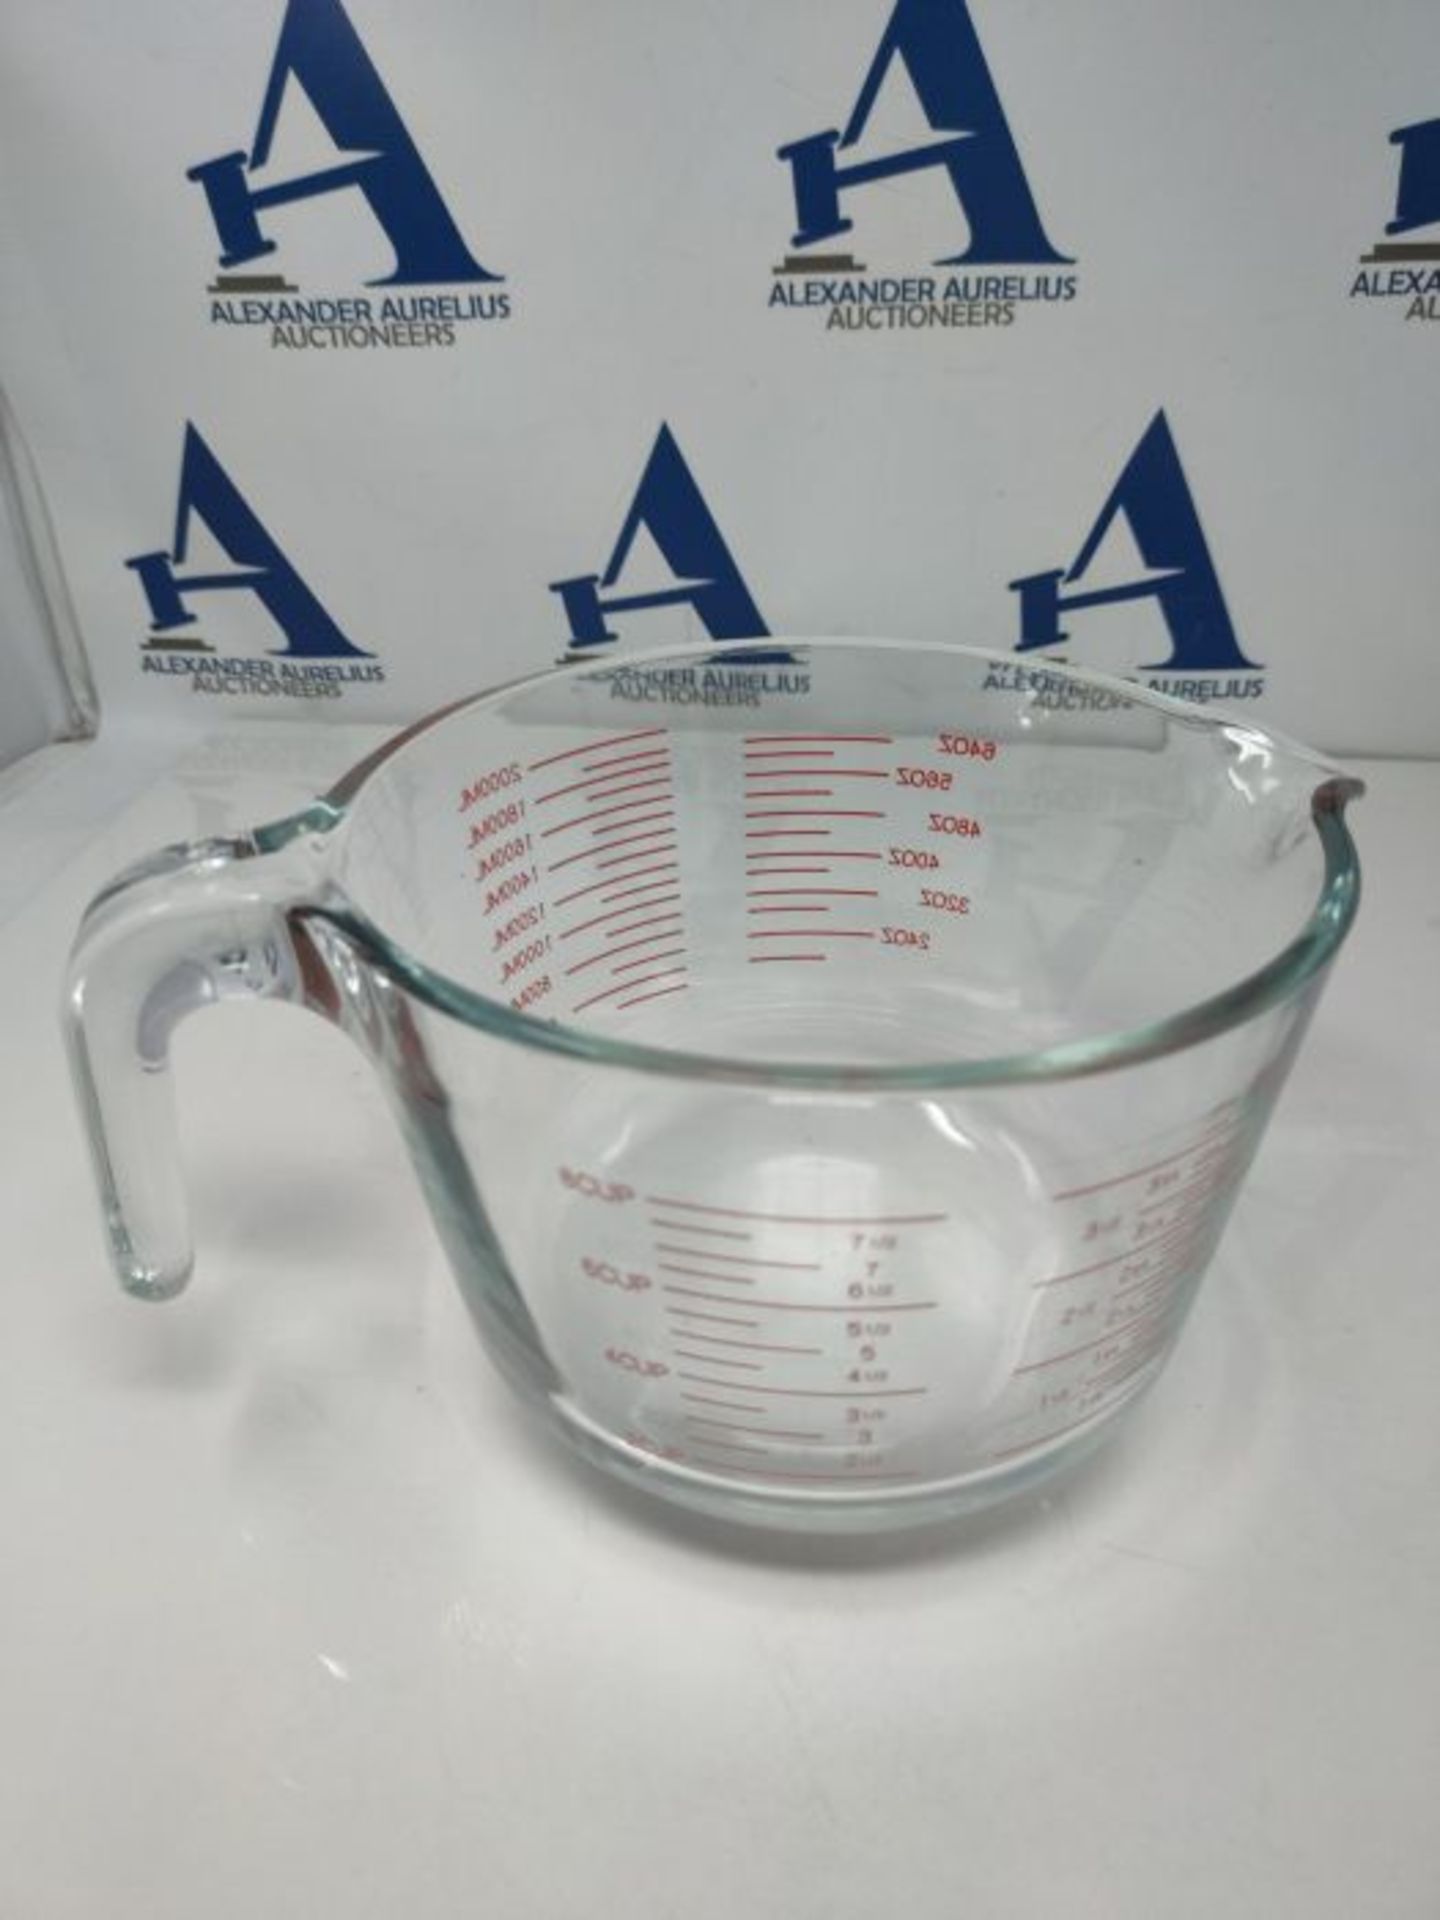 AmazonCommercial LMC200 Glass Measuring Cup, 8 Cup Capacity (2 Liters) - Image 3 of 3